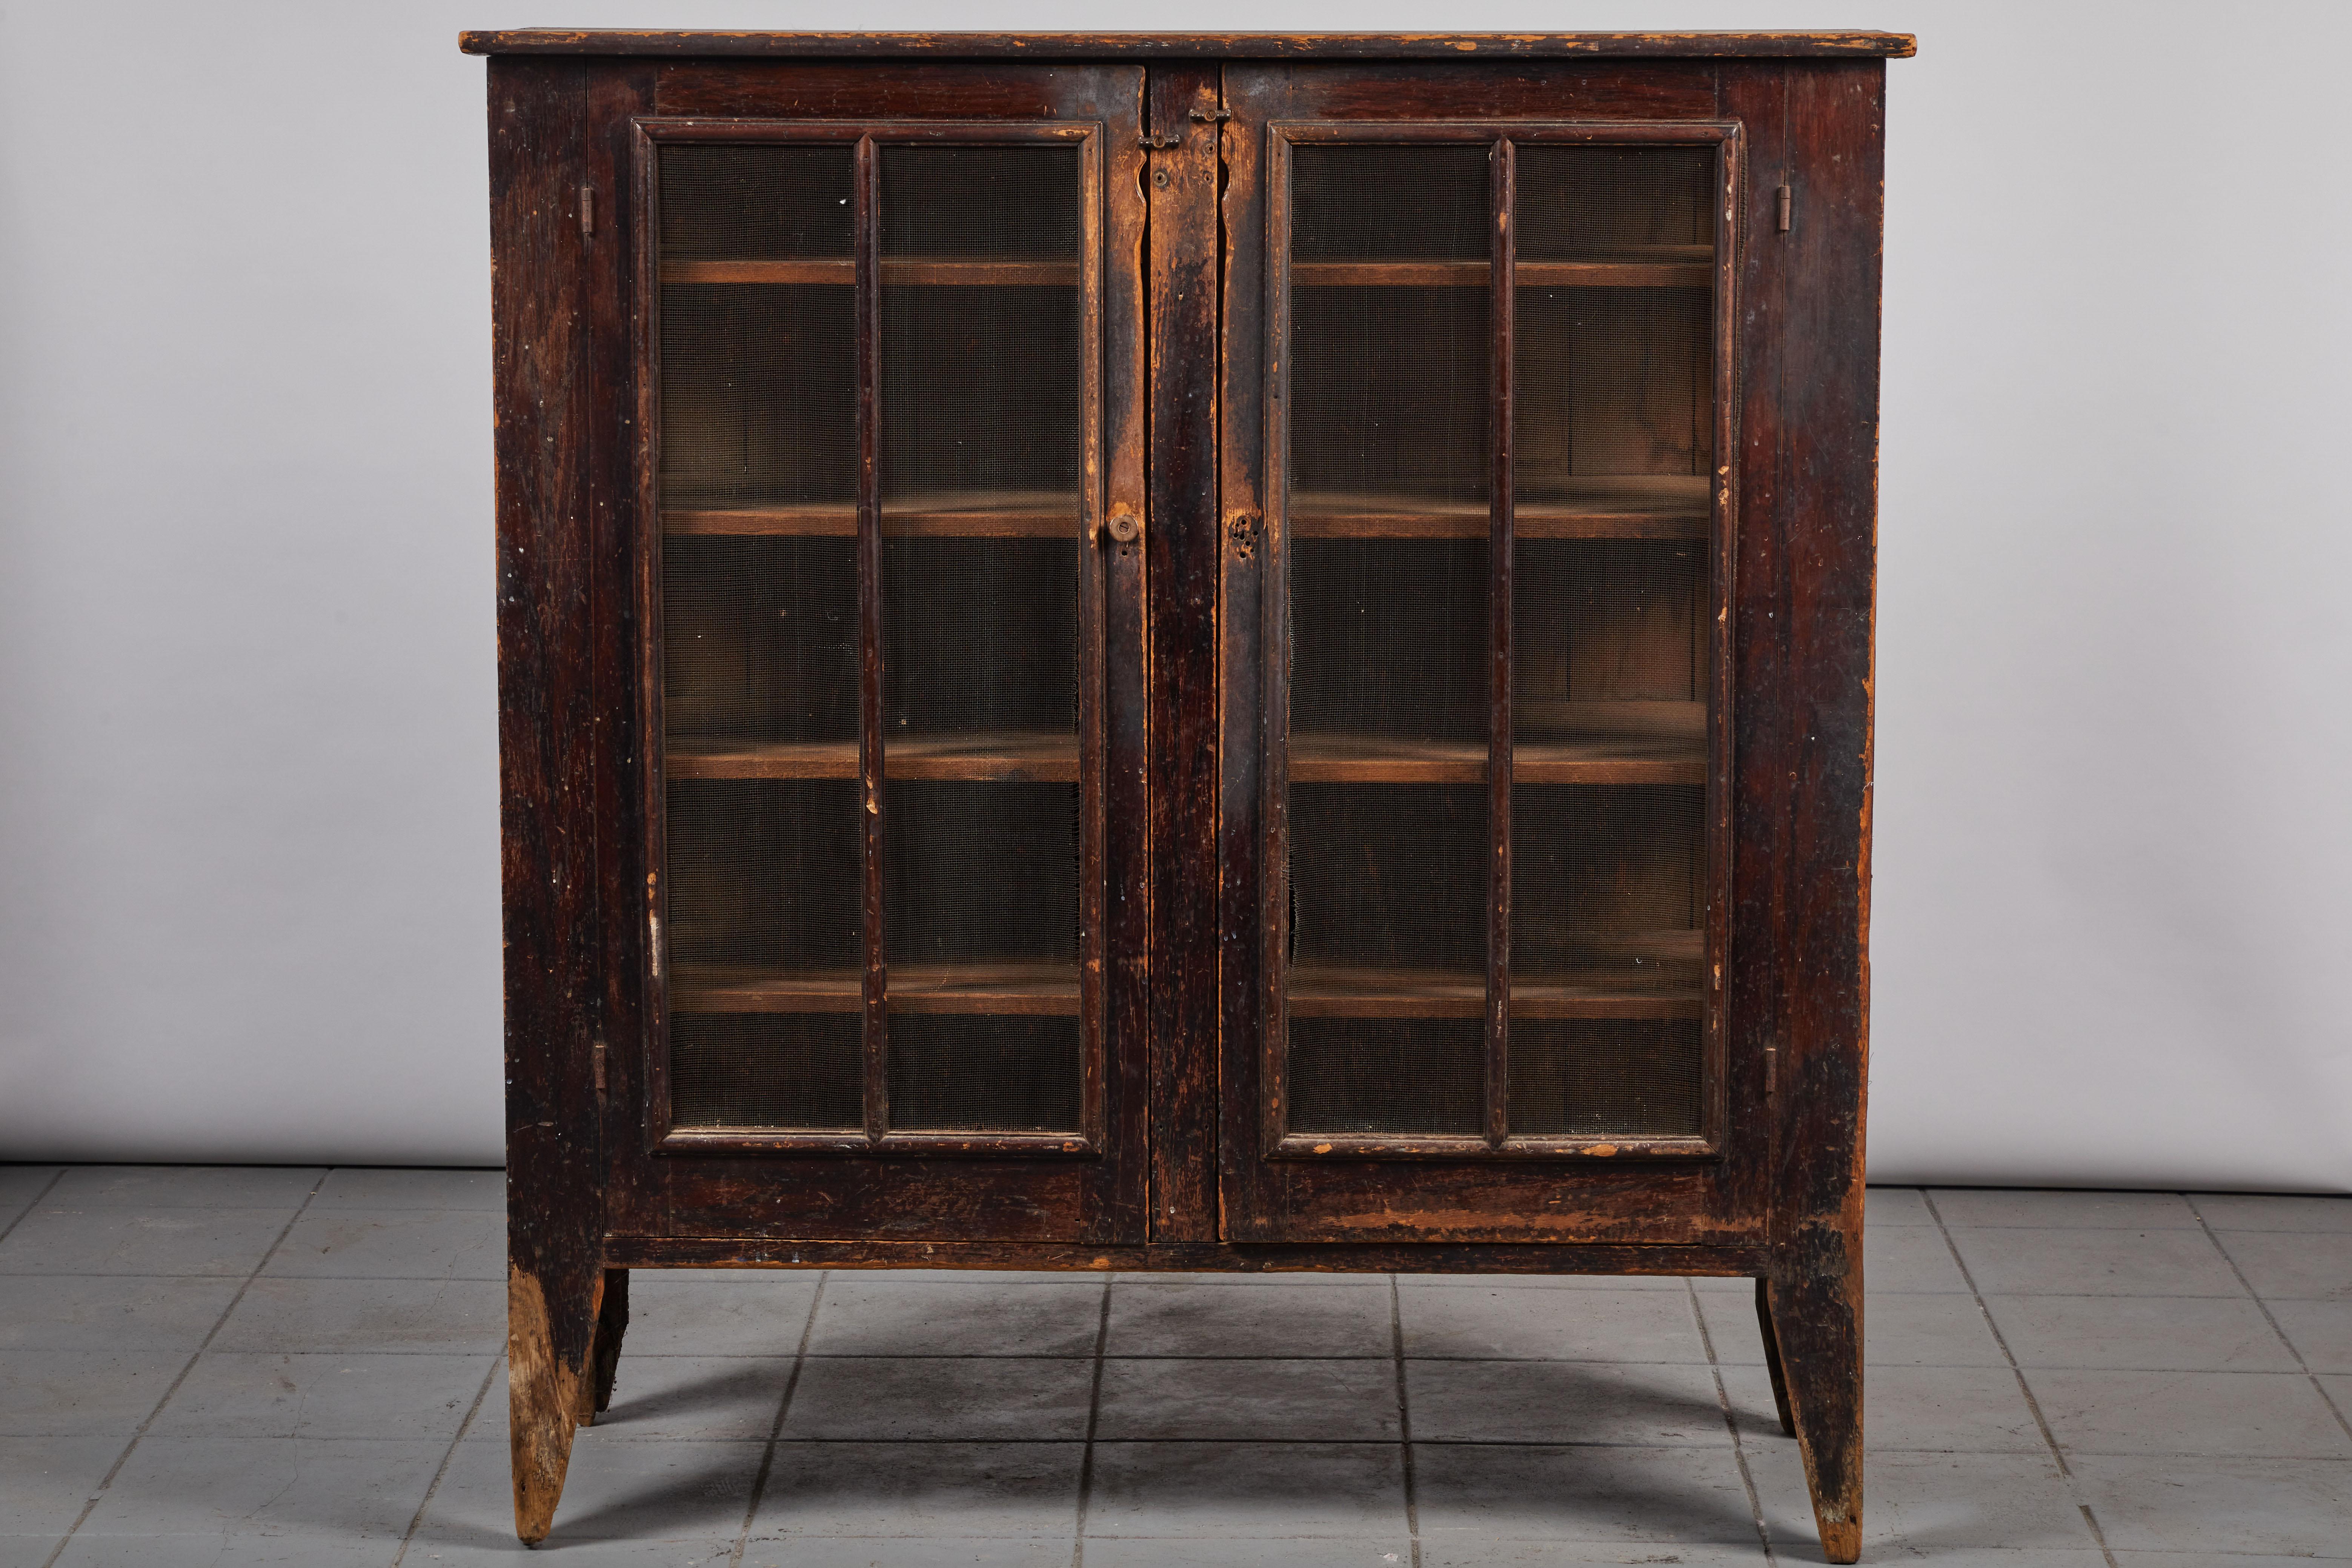 Early American dark stained two door screened pie safe with four interior shelves.